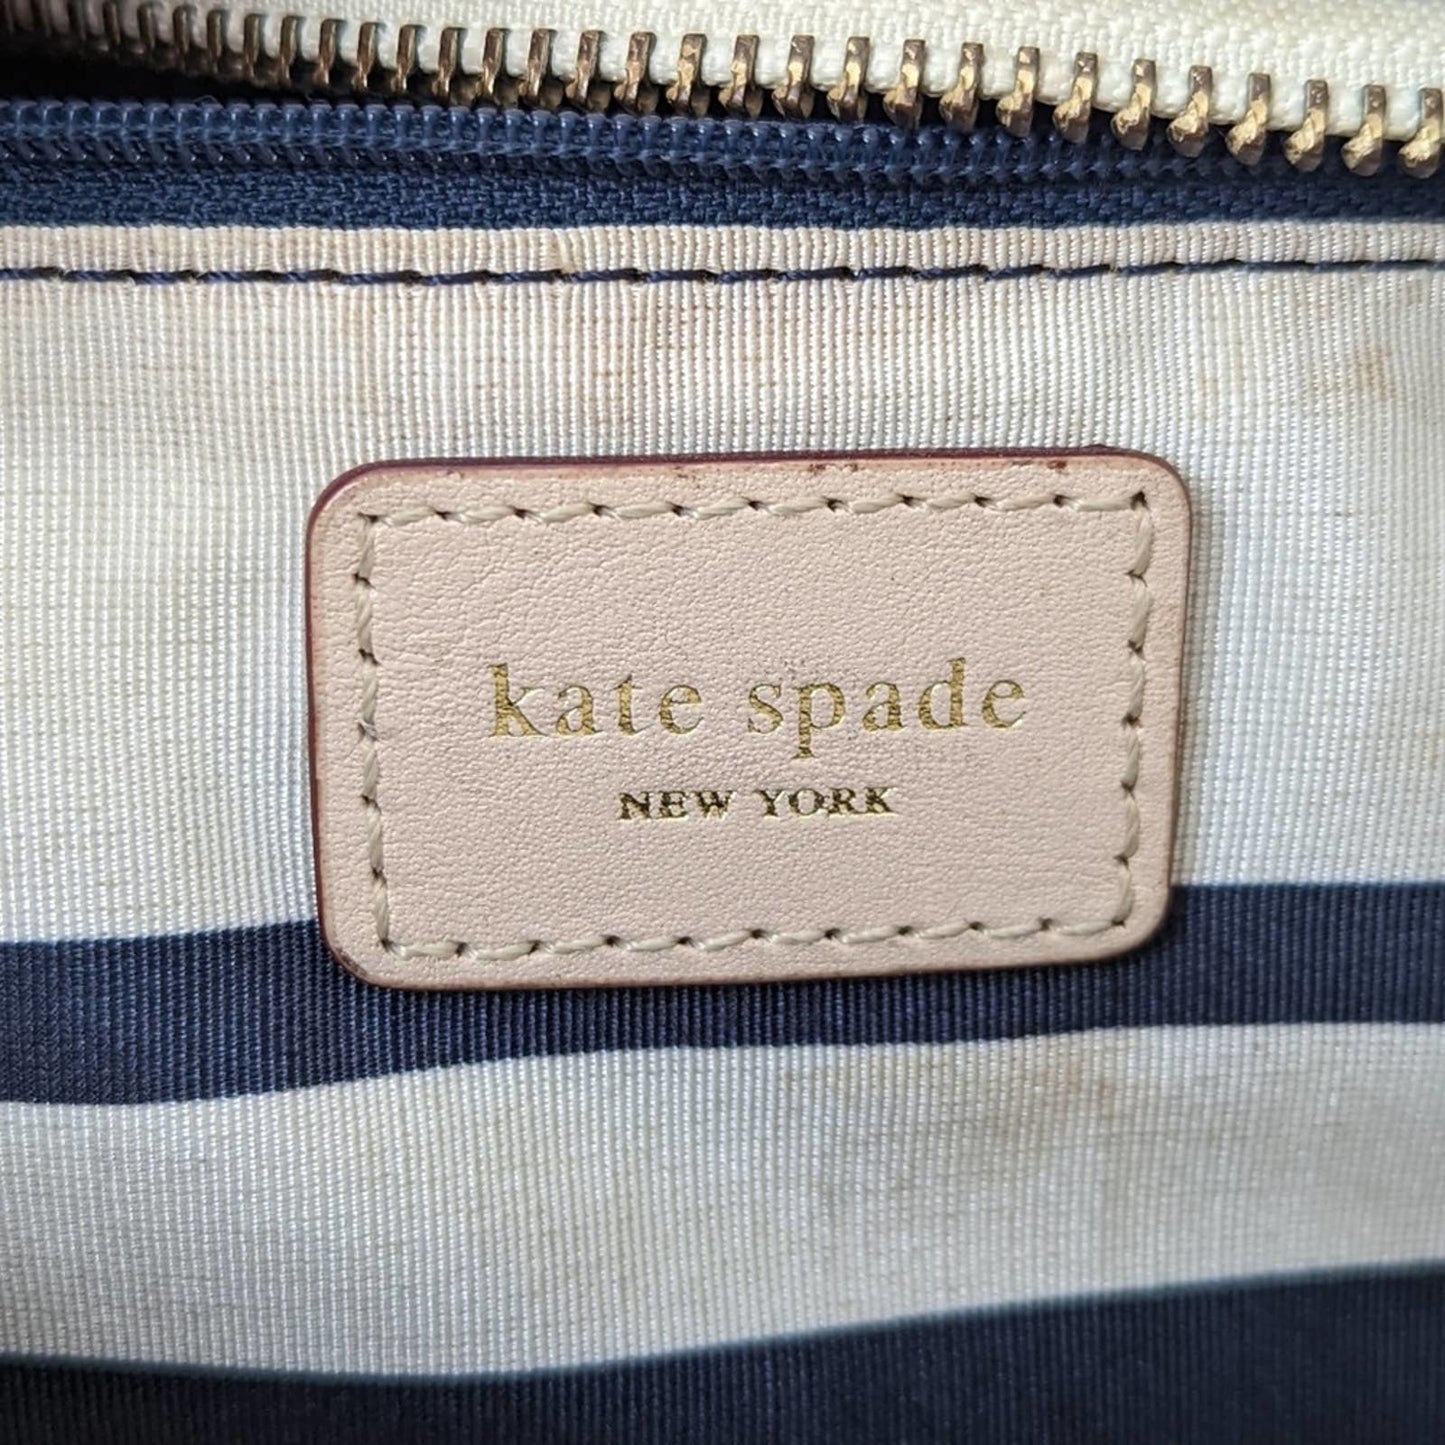 Kate Spade NY Stevie Bershire Road Leather Satchel Tote Purse Bag